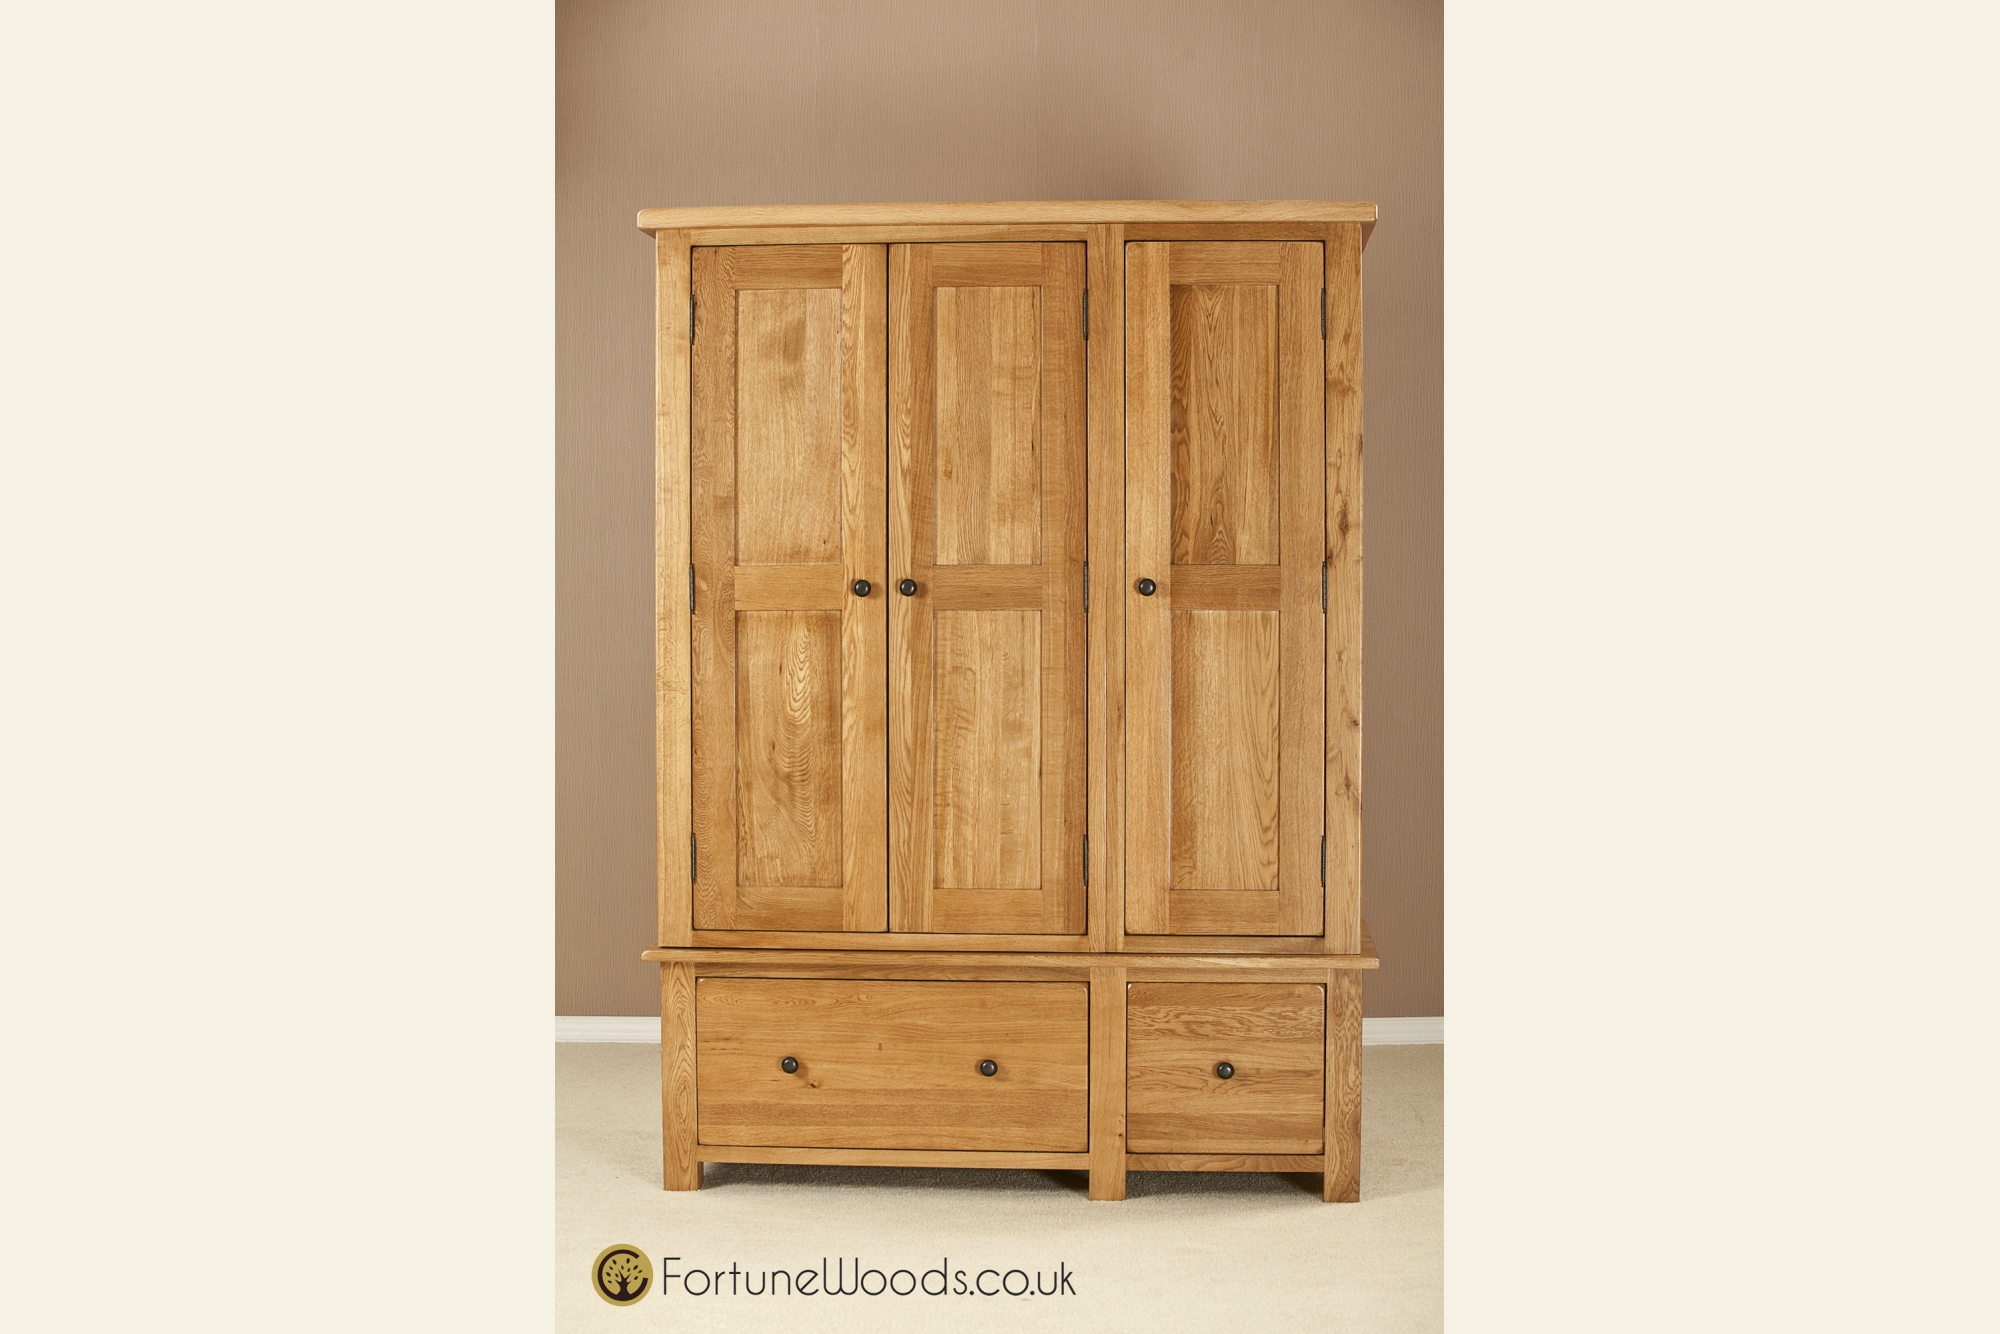 Fortune Woods Cotswold Triple Wardrobe With Drawers